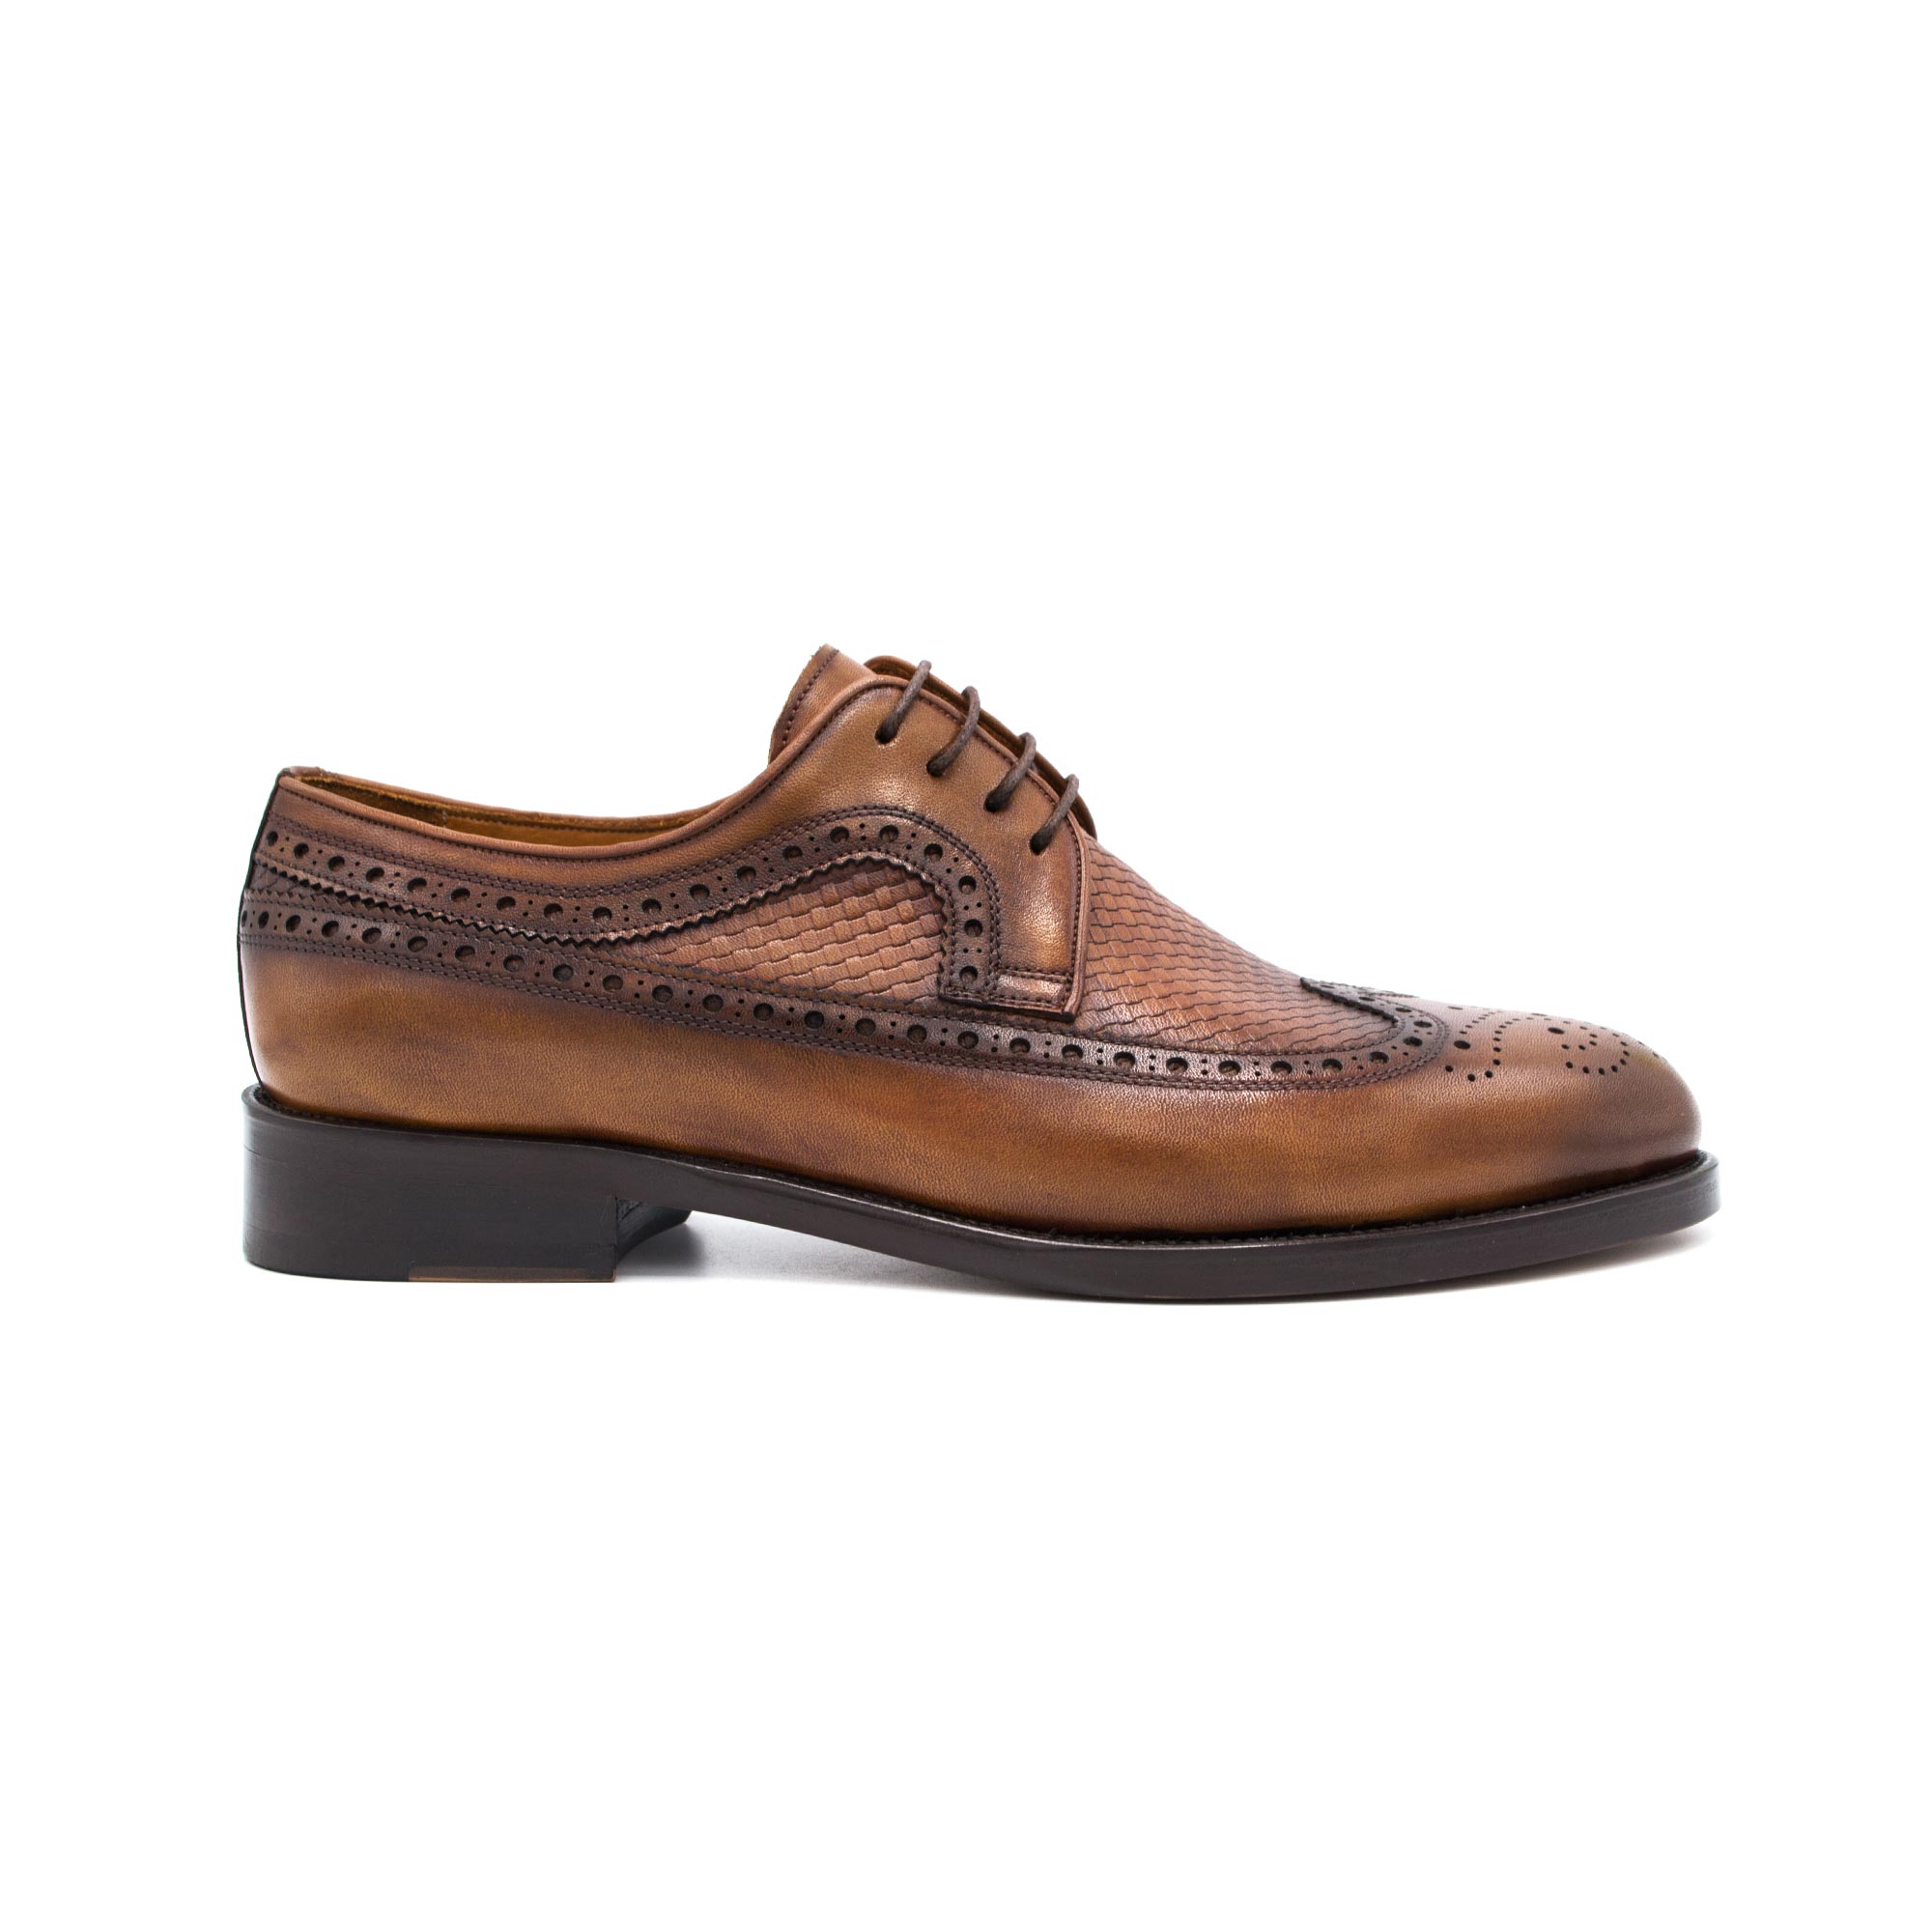 Tobacco Brown Brogue Derby Shoes | Zerbay Collection